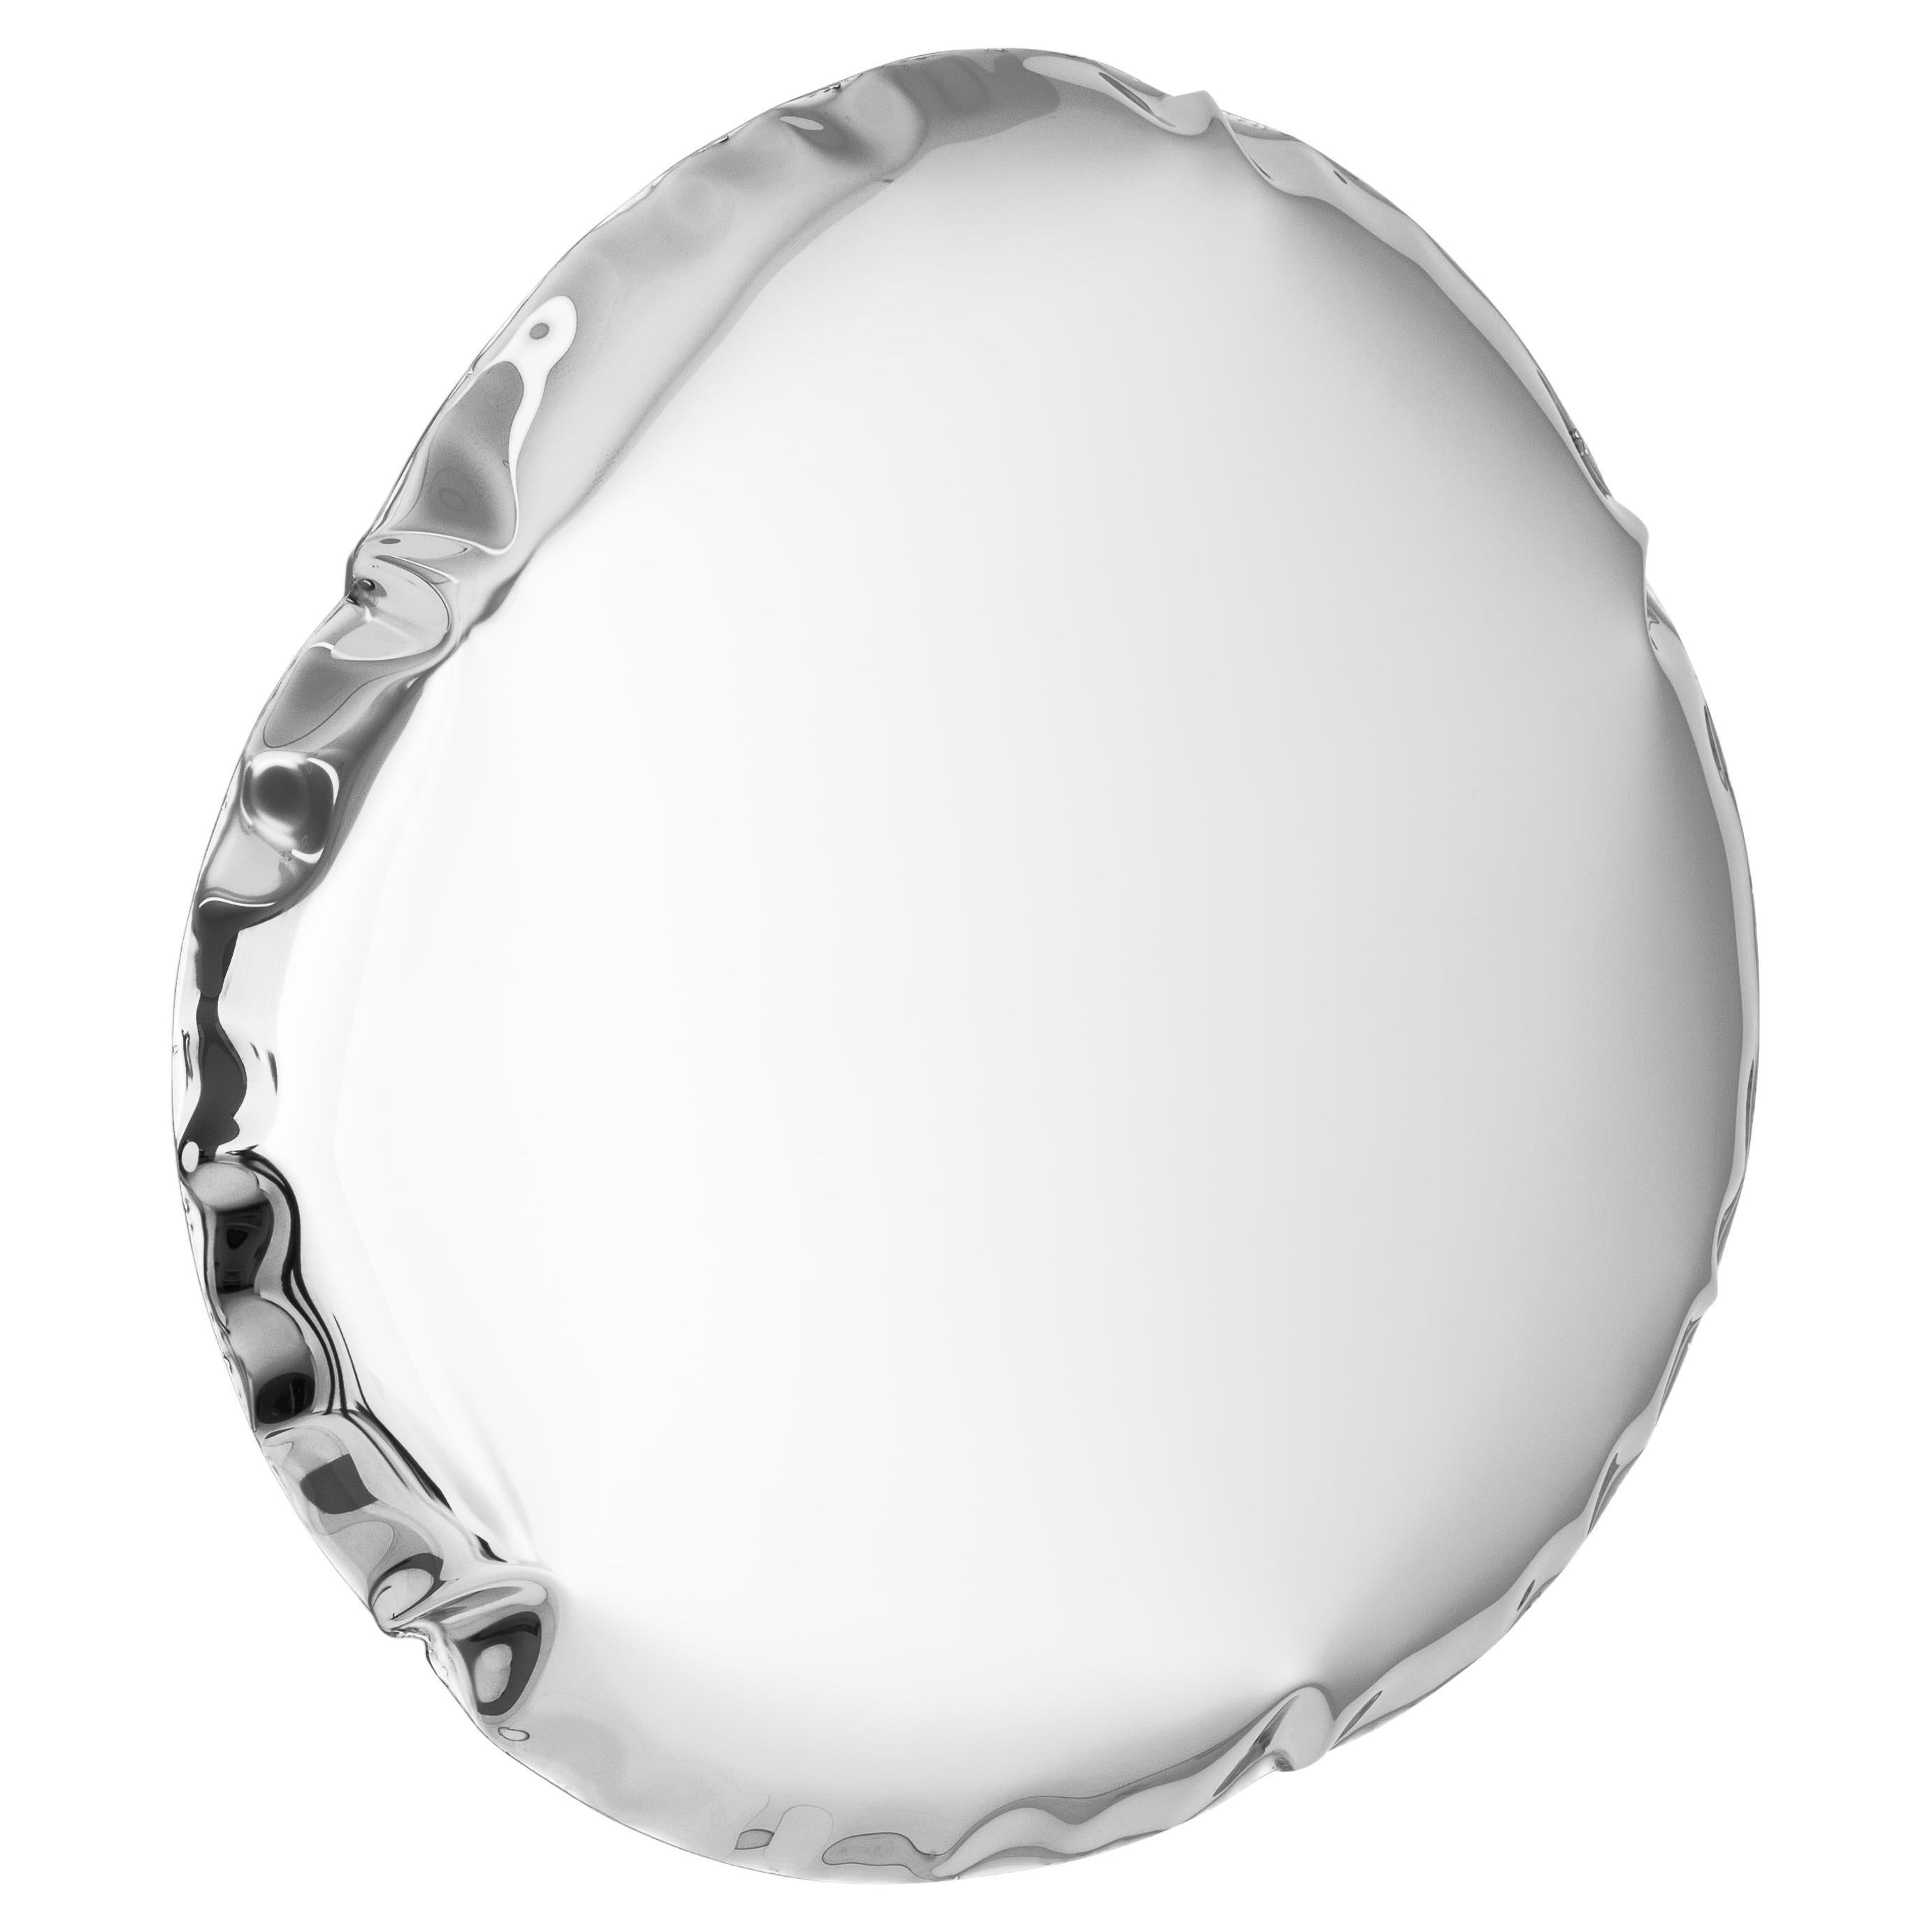 In Stock Tafla O6 Polished Stainless Steel Wall Mirror by Zieta For Sale